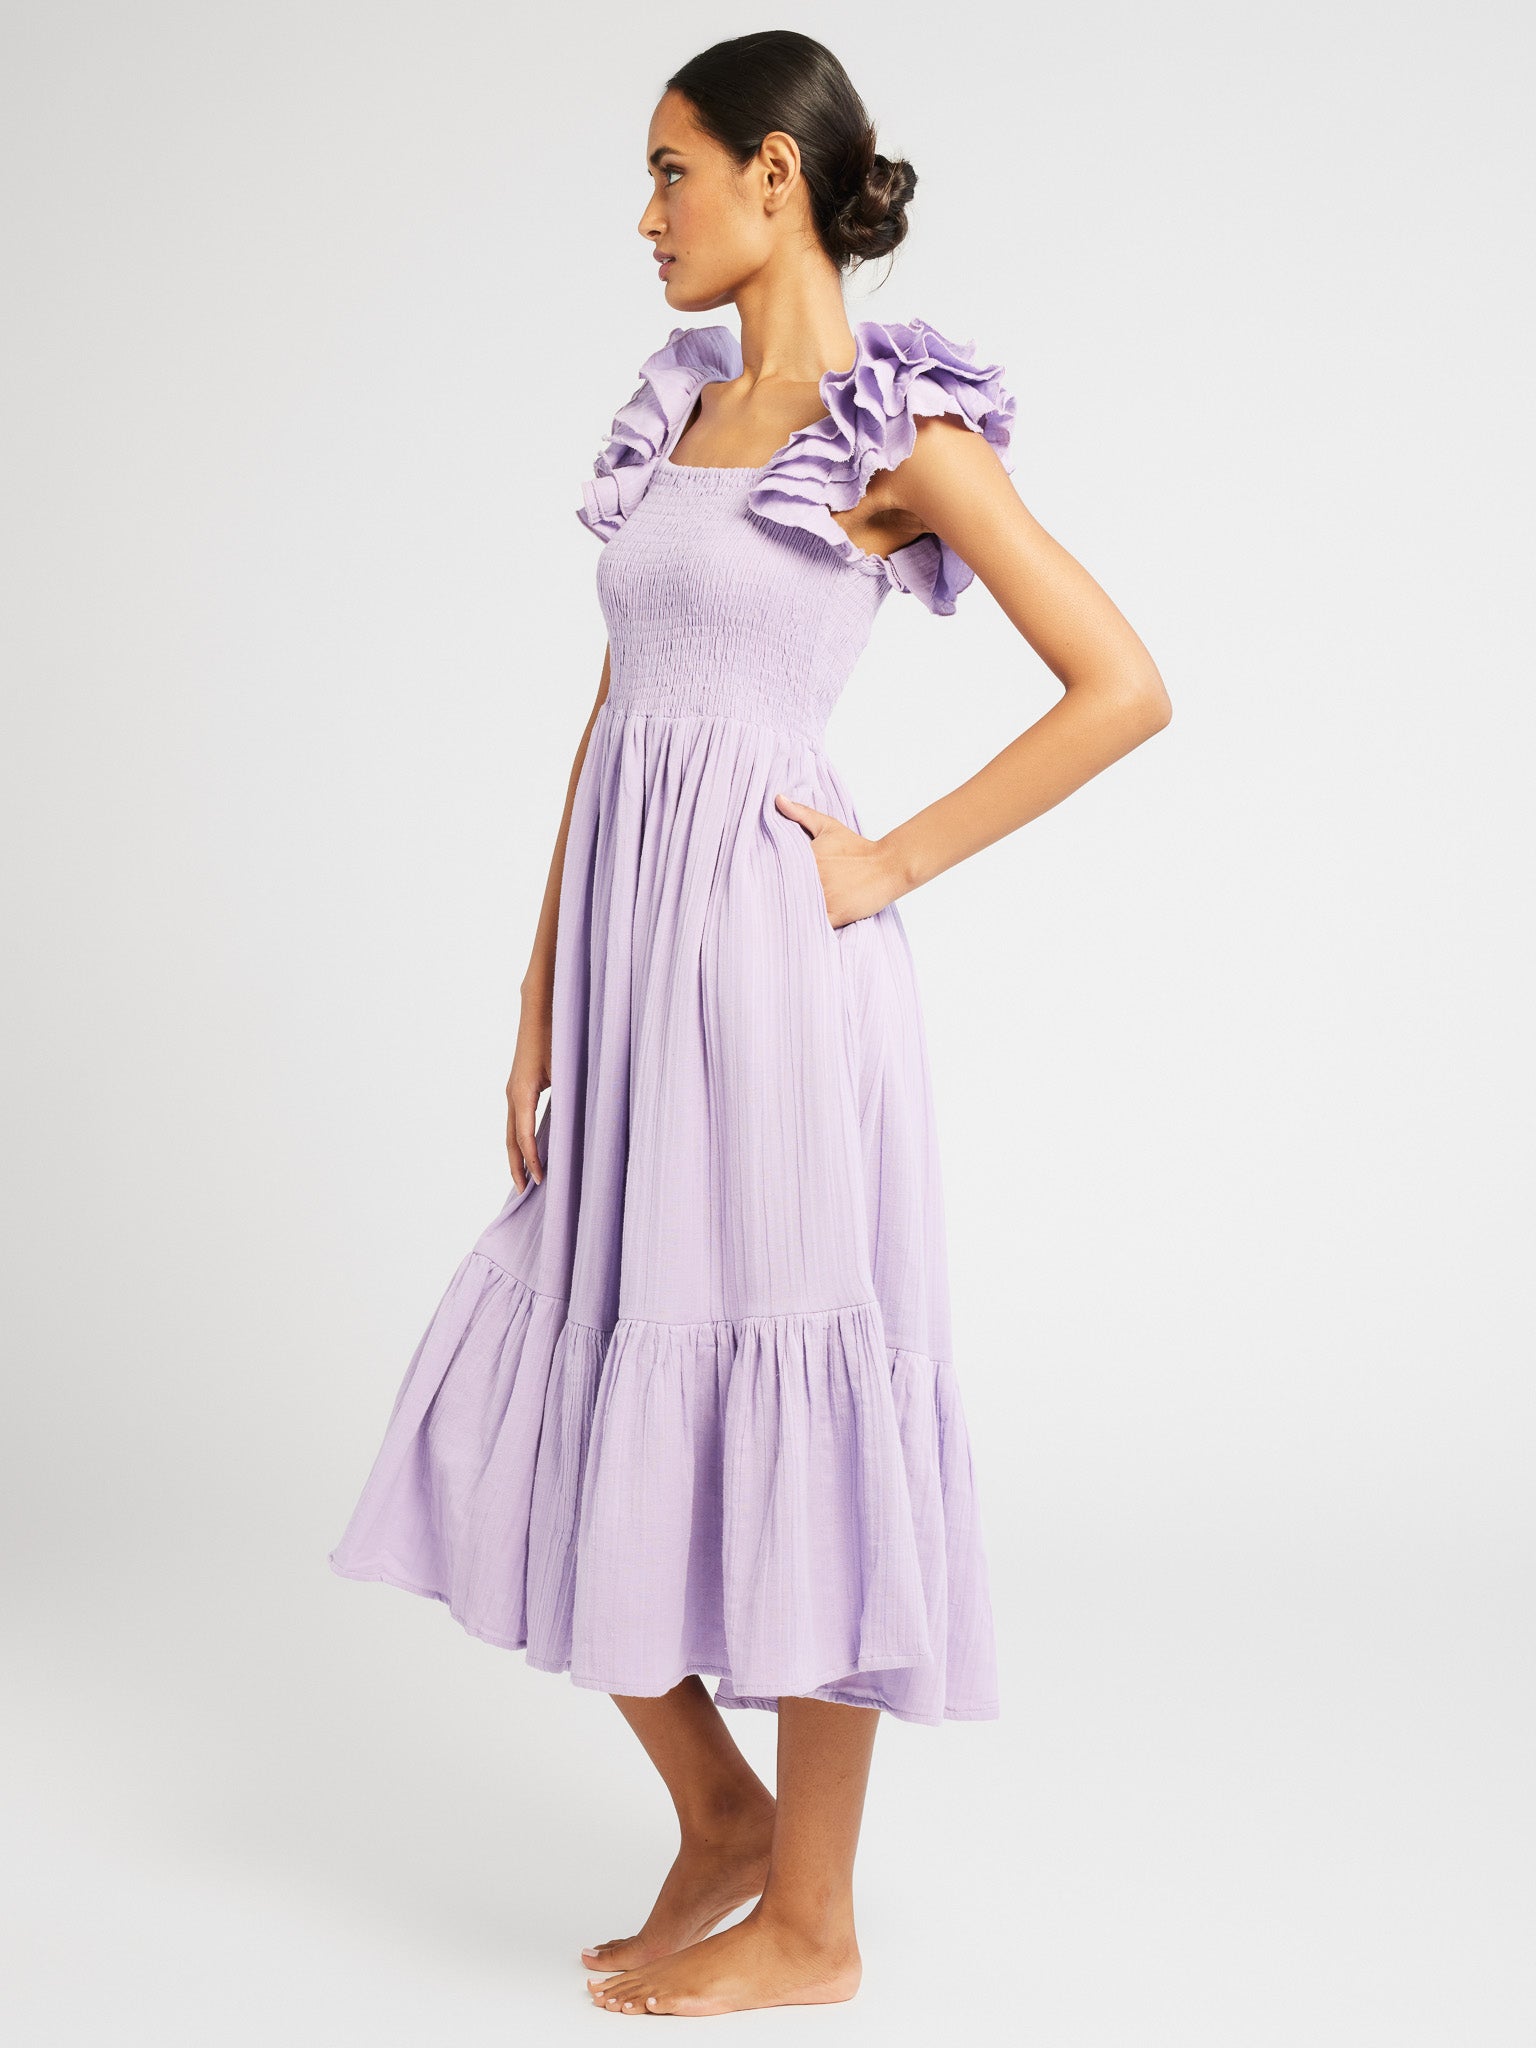 MILLE Clothing Olympia Dress in Taffy Double Gauze